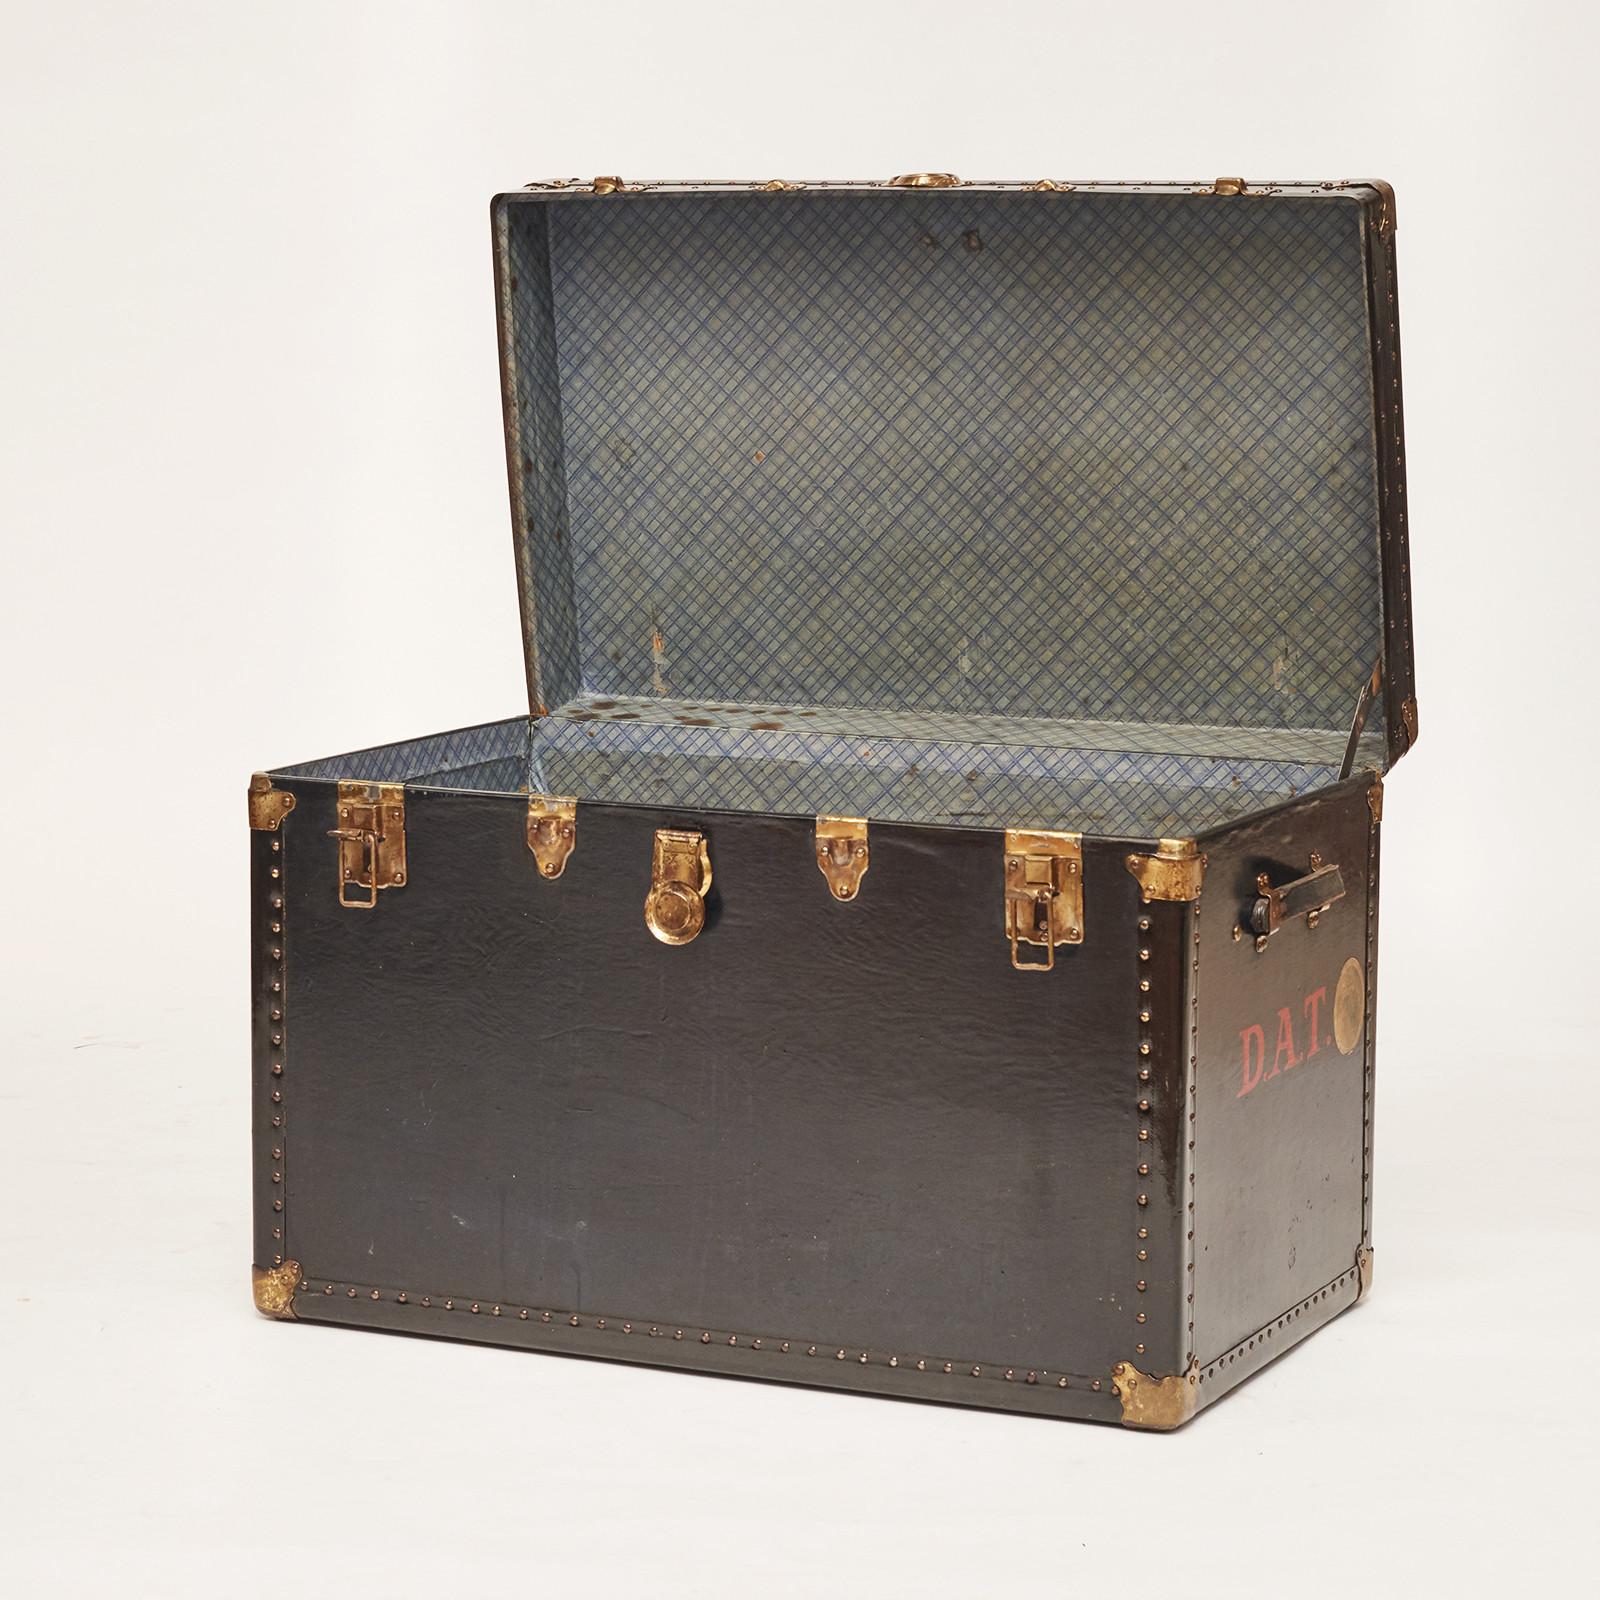 English travel trunk. Constructed with a base trunk box made of wood covered with black and blue coated canvas. The interior is covered with patterned paper. Brass fittings.
Original condition, England, 1900-1920.